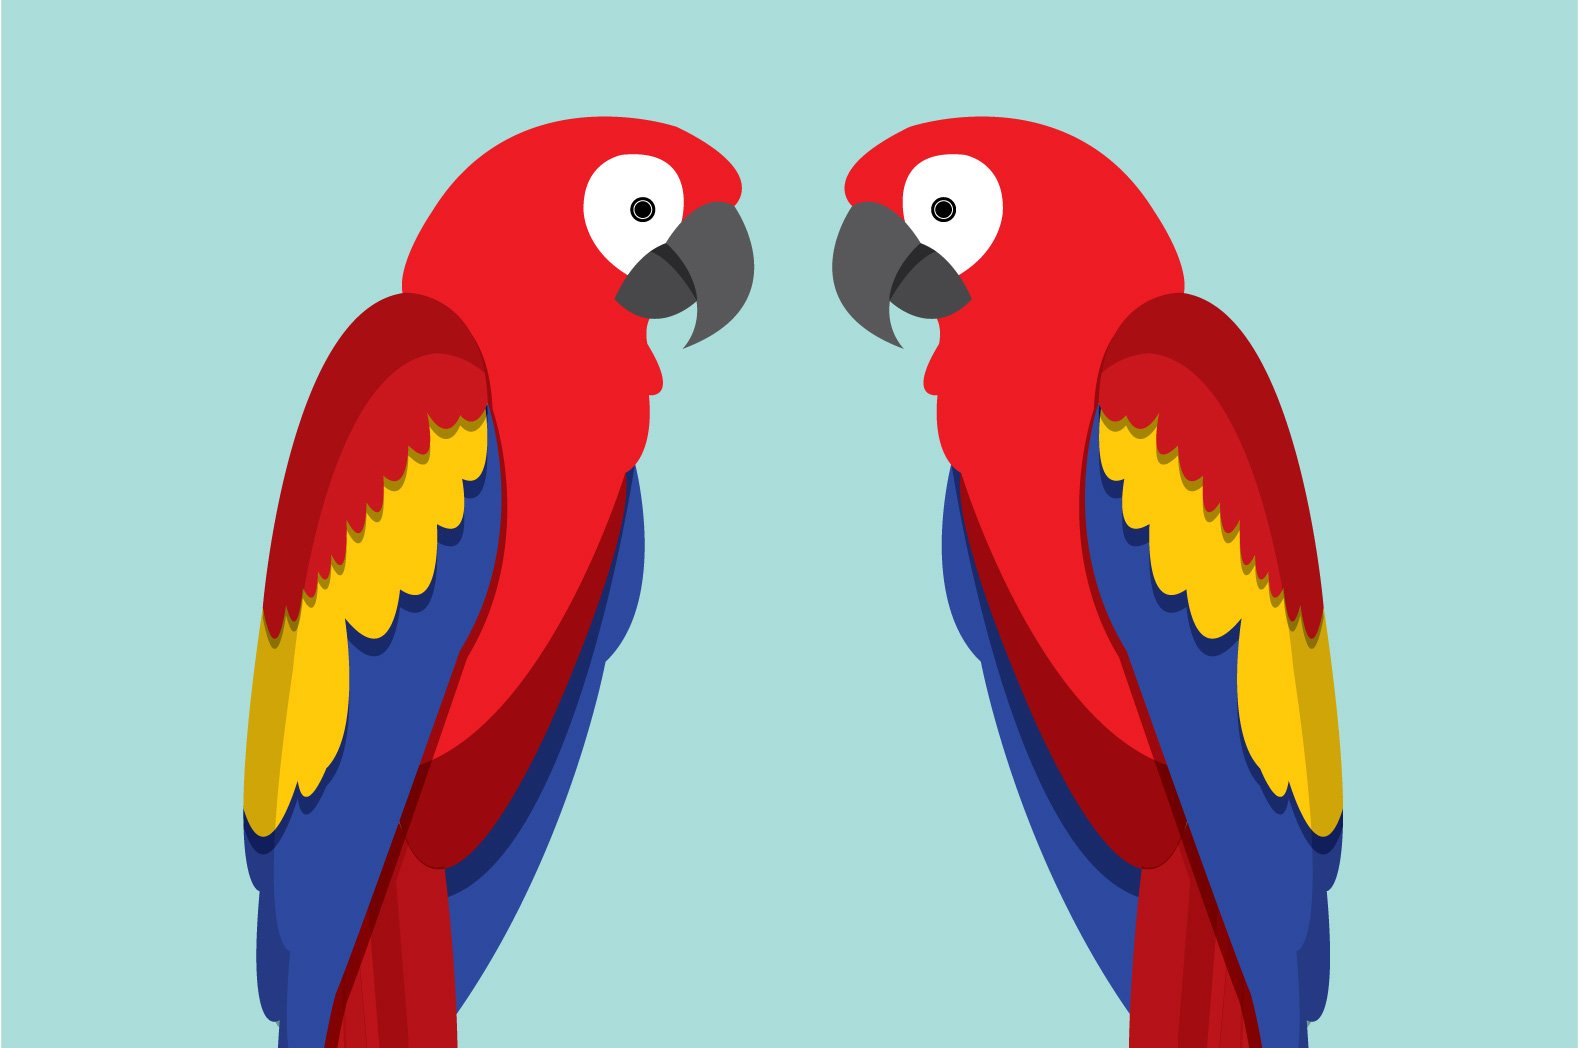 How to draw Macaw Parrot Bird drawing easy  https://www.youtube.com/channel/UCPm7kSiPXYQXeXjxmGvHaPg | By ART mission  Smart EducationFacebook